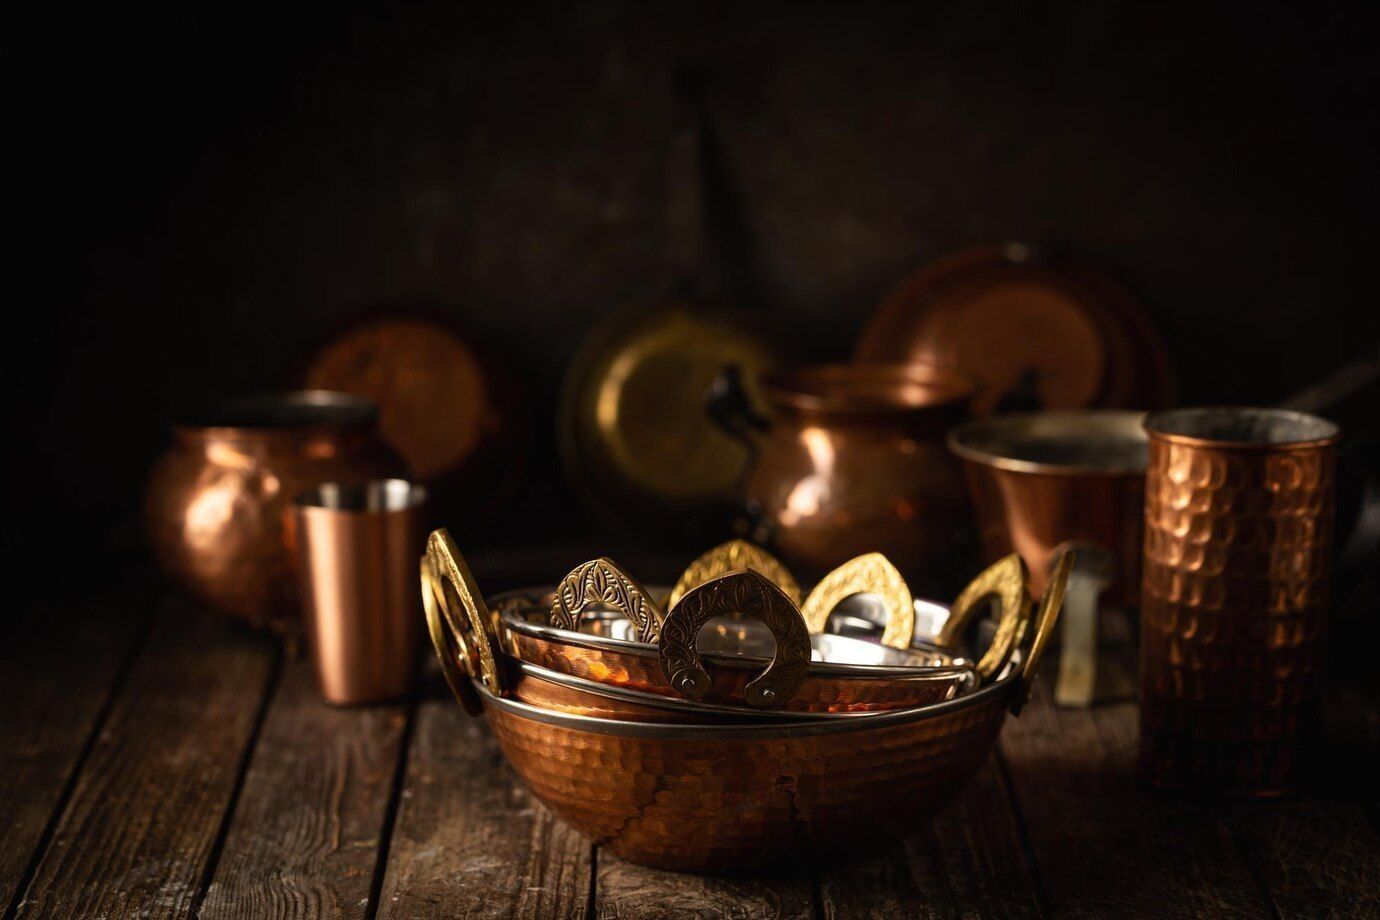 Cooking in Brass, Iron, Bronze Utensils and Their Benefits - News18